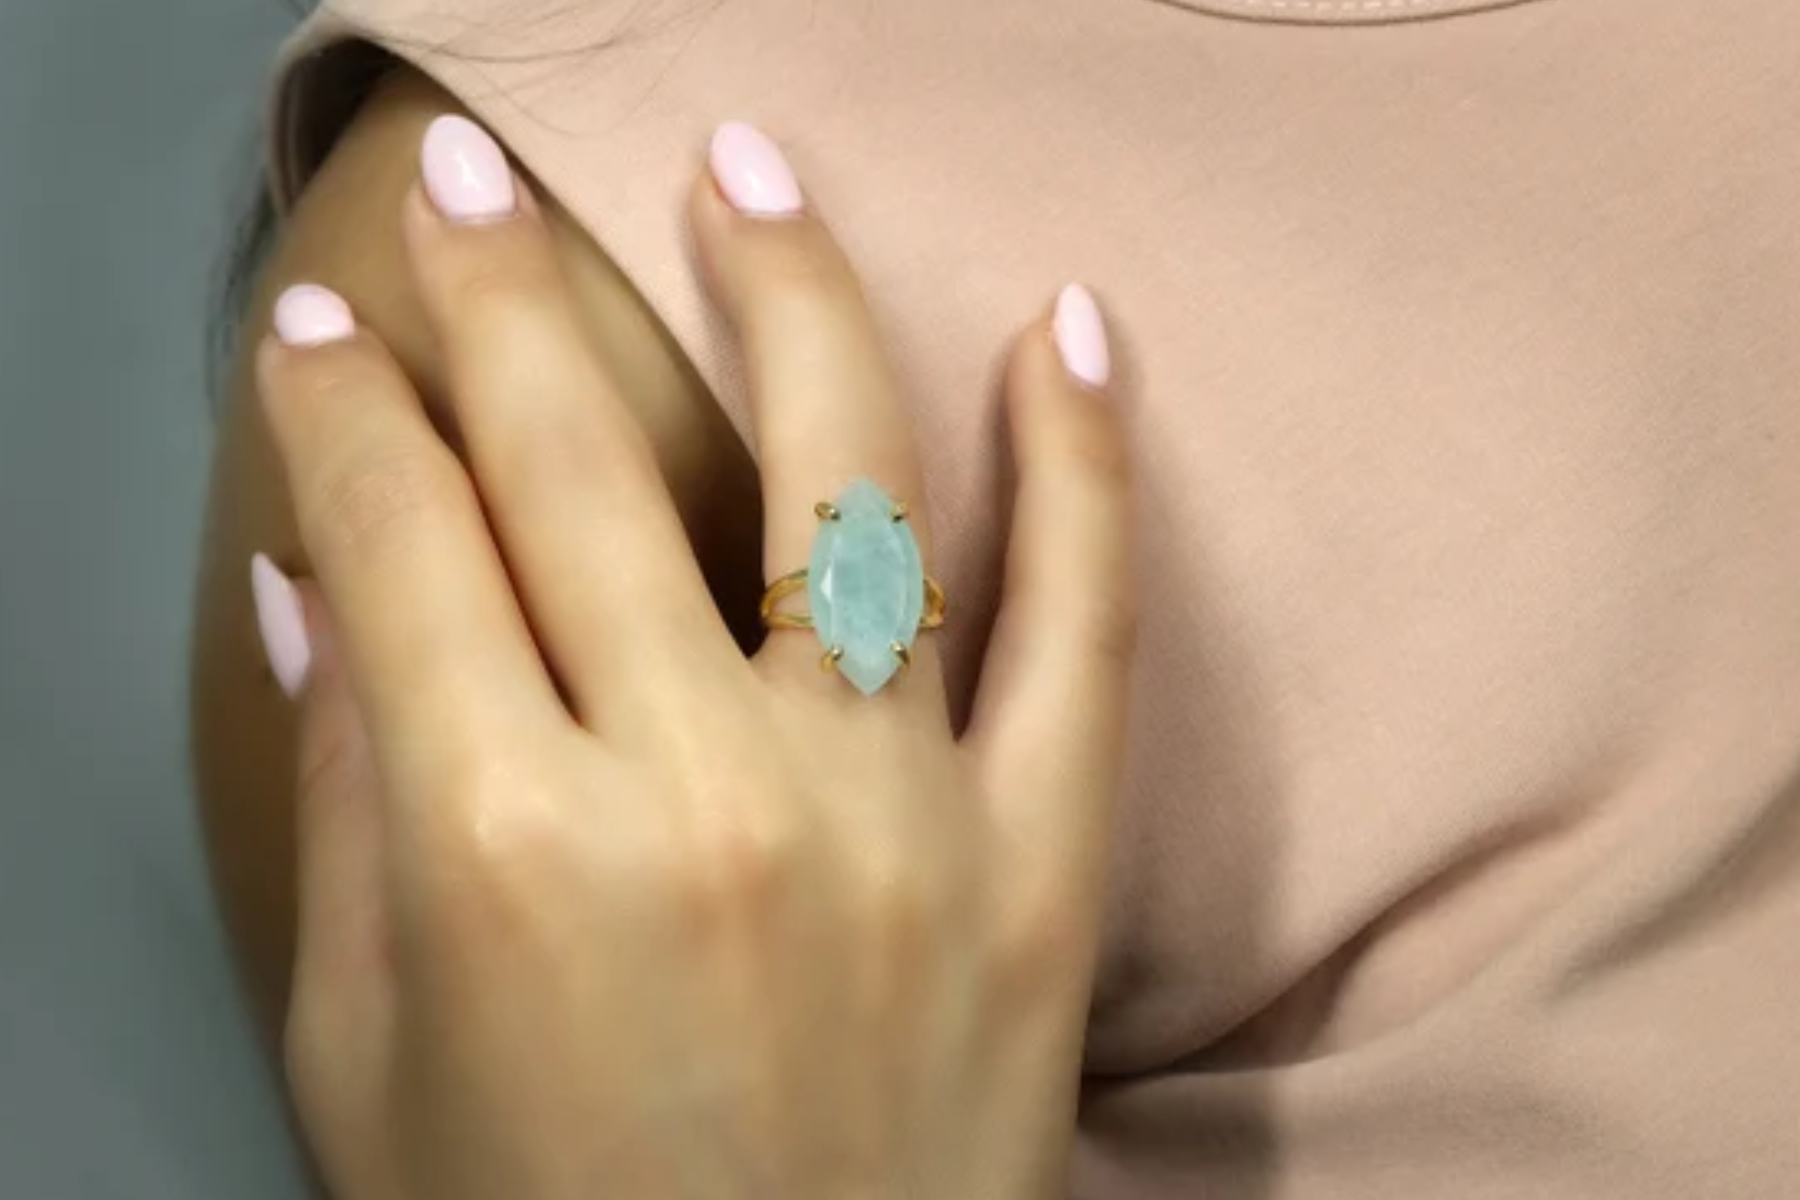 A lady with an aquamarine ring